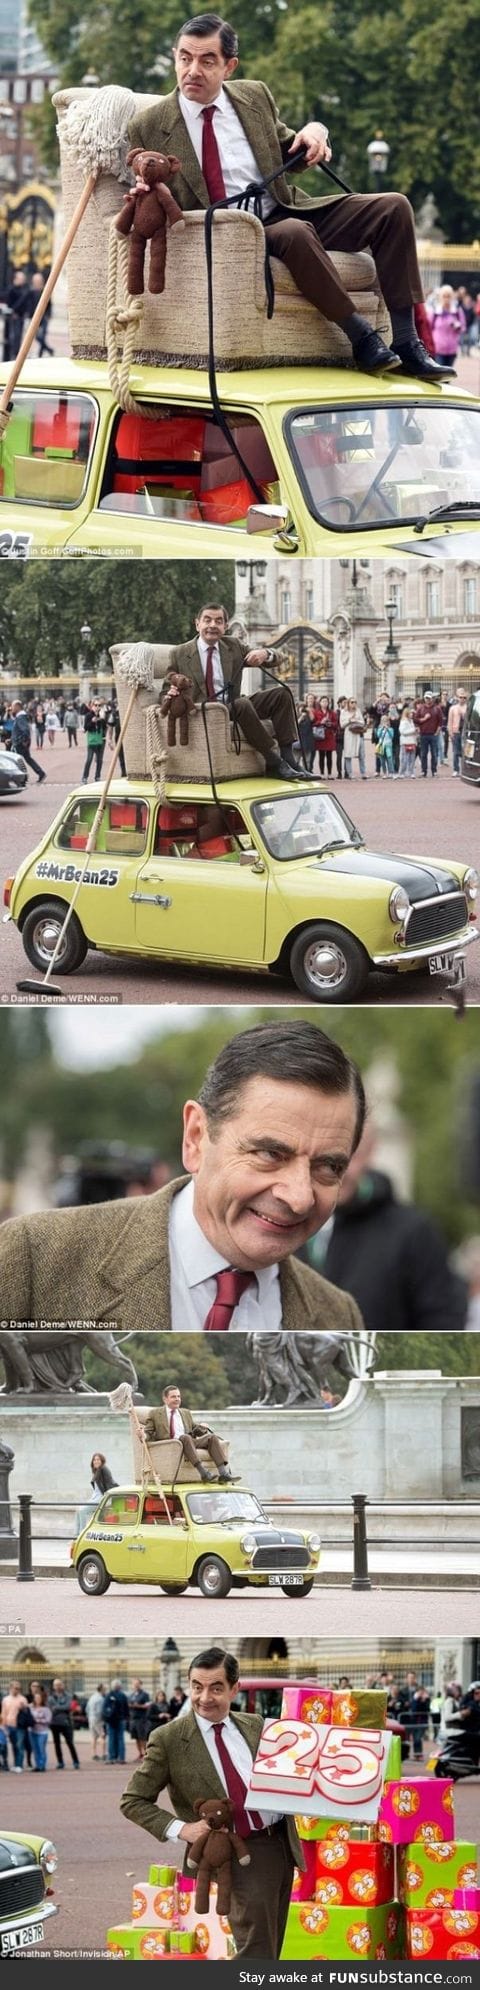 Mr. Bean returned to the streets in England